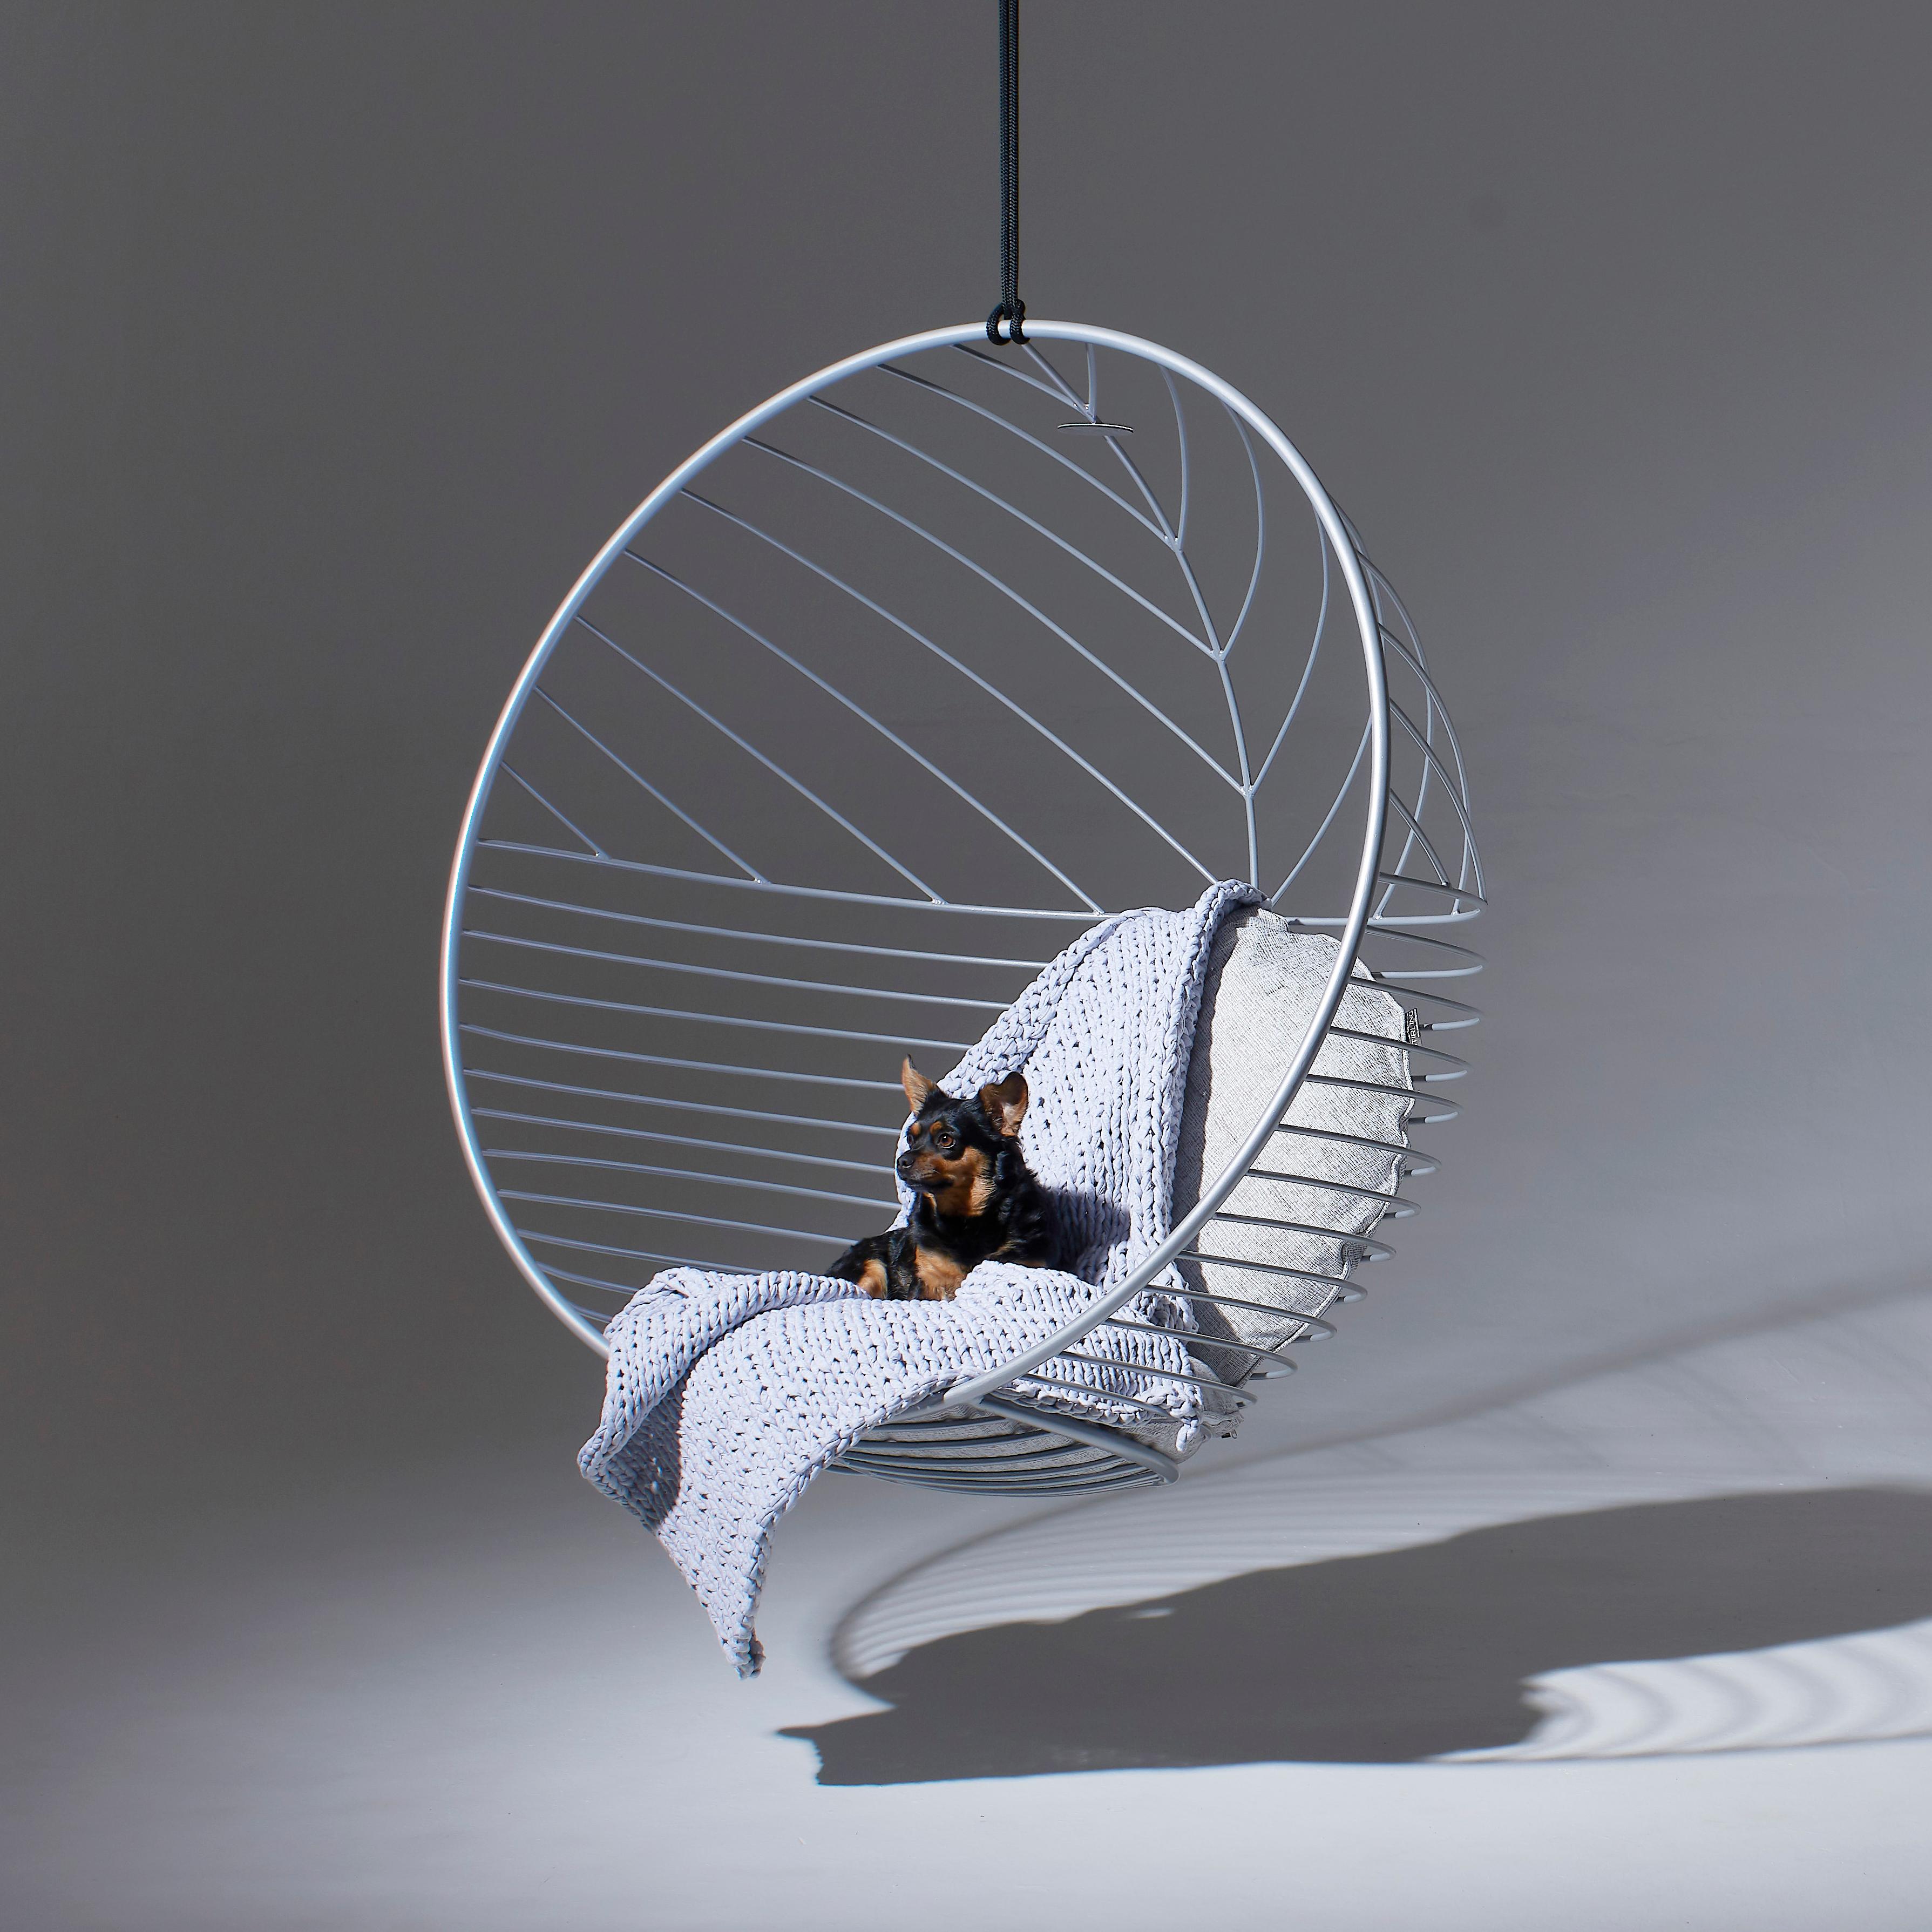 Minimalist Modern Bubble Chair Made from Steel, Great for Outdoor For Sale